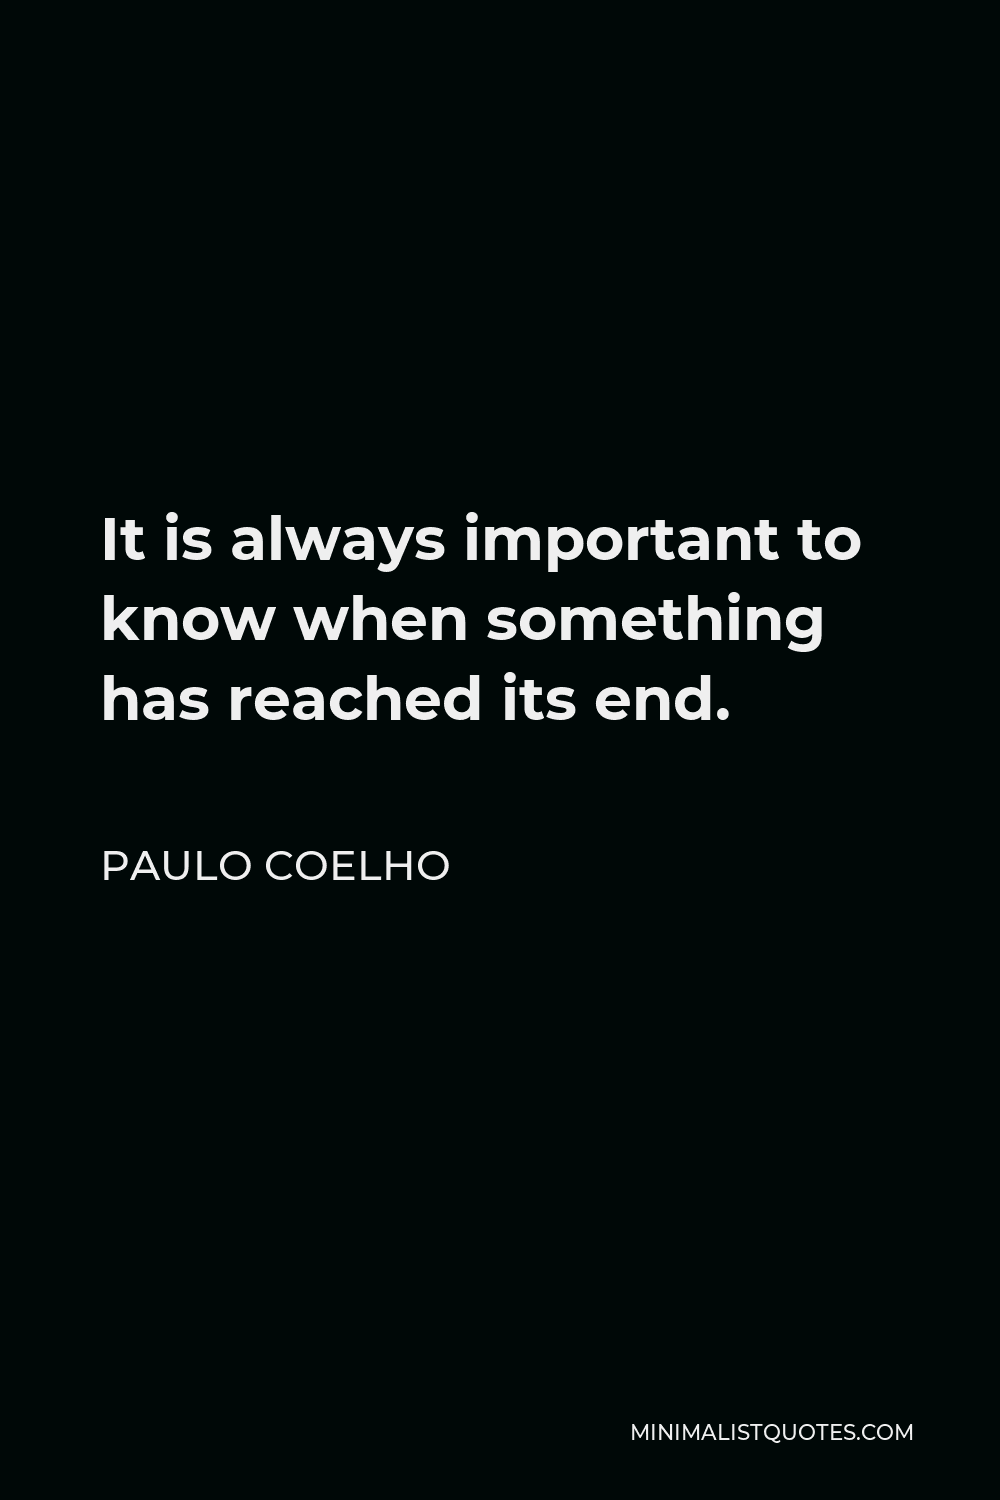 Paulo Coelho Quote: The simple things are also the most extraordinary ...